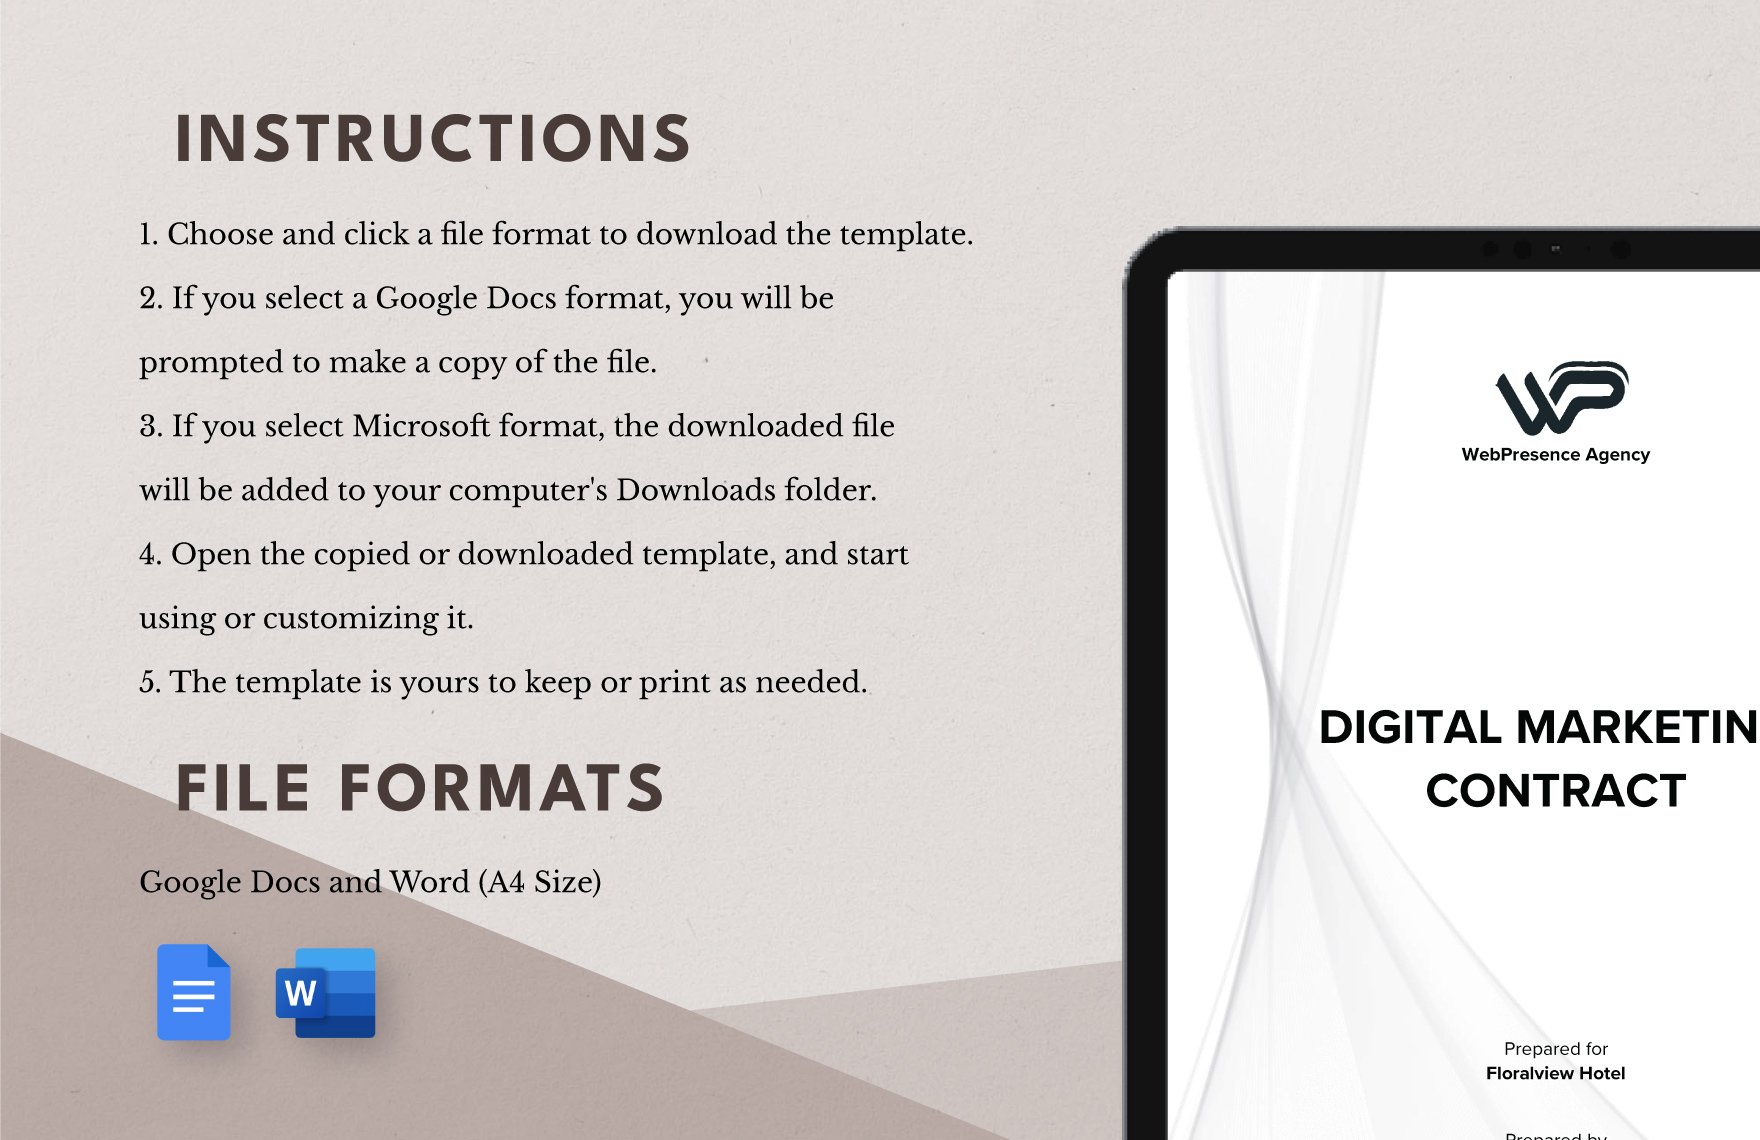 Digital Marketing Contract Template